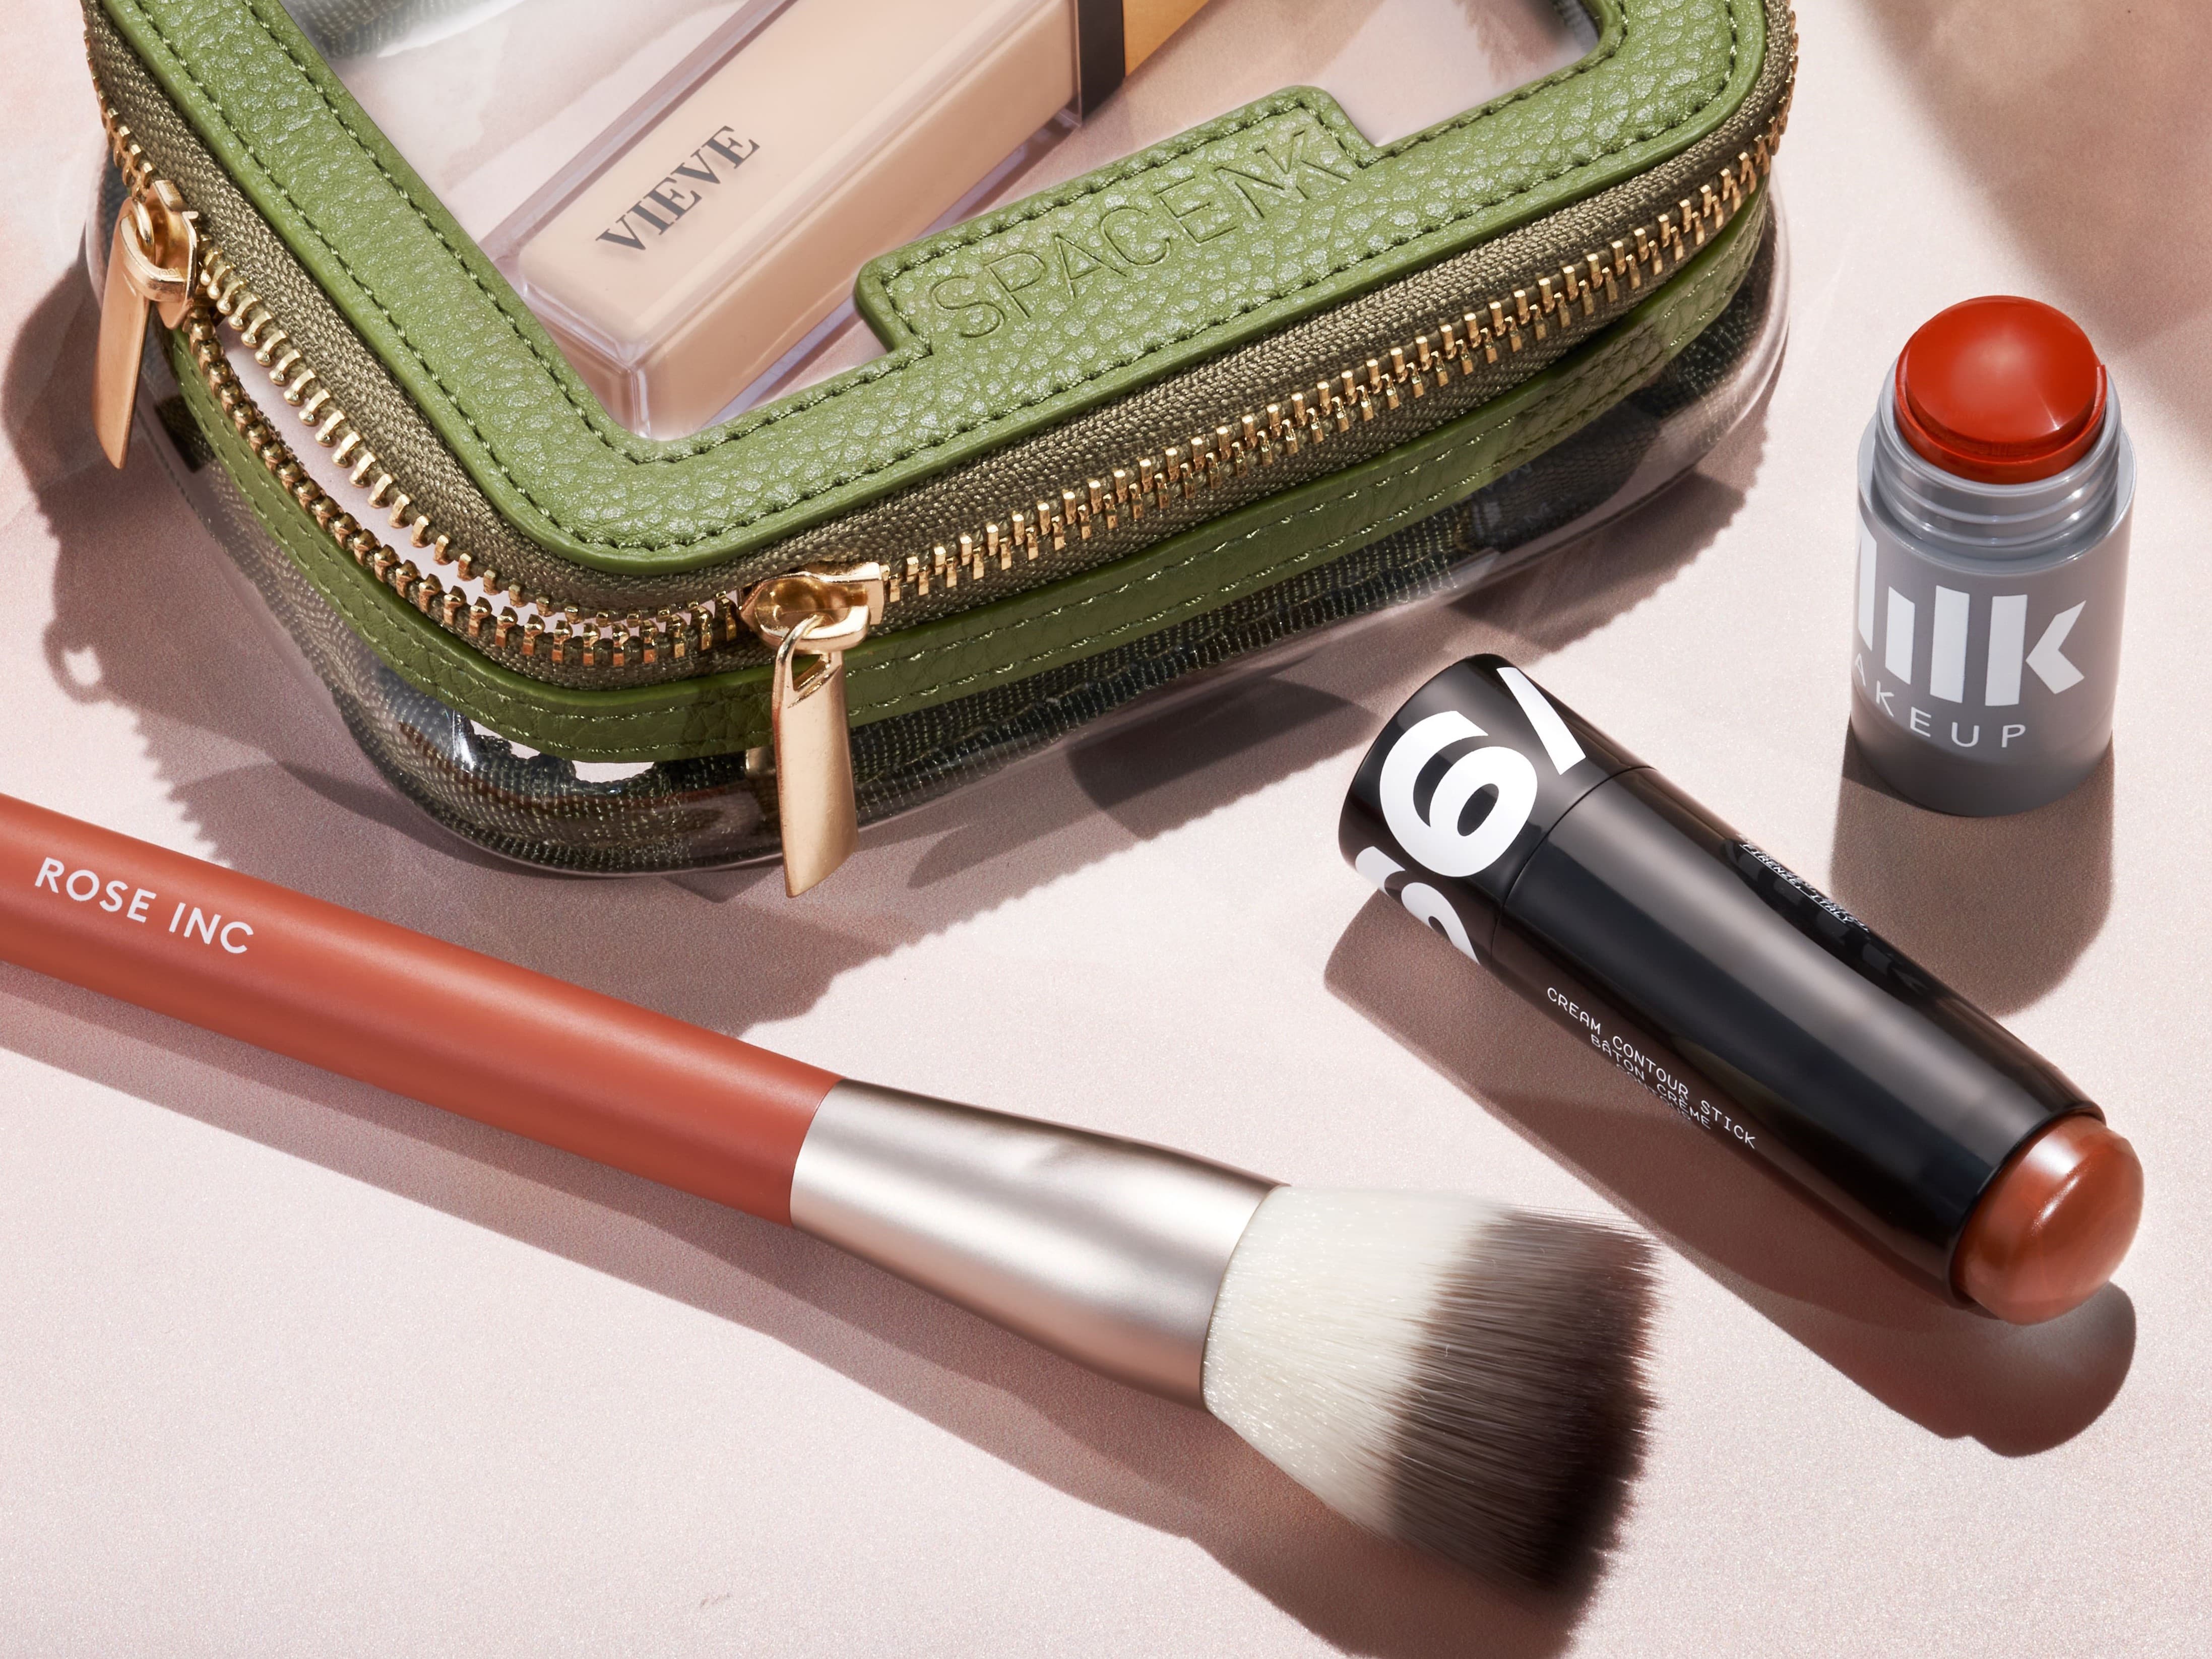 Guide to makeup underpainting | Space NK